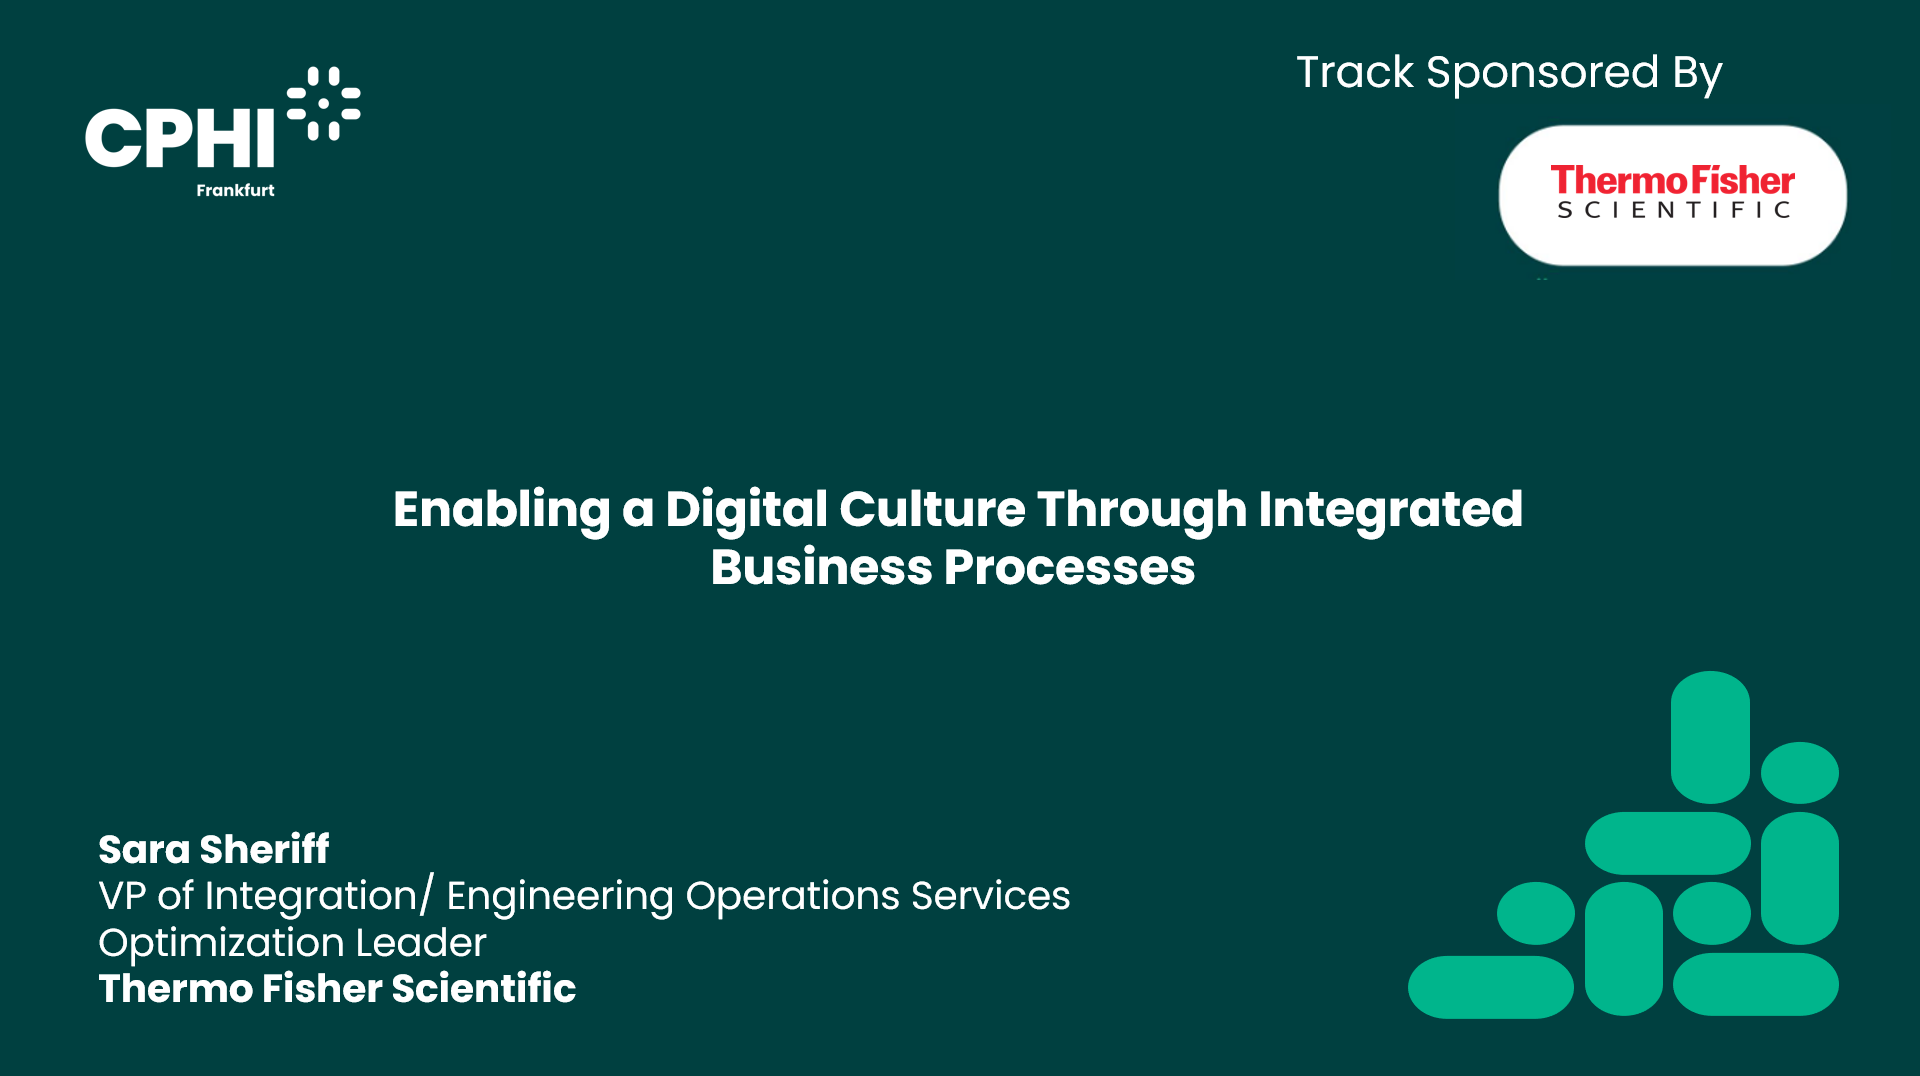 Enabling a Digital Culture Through Integrated Business Processes